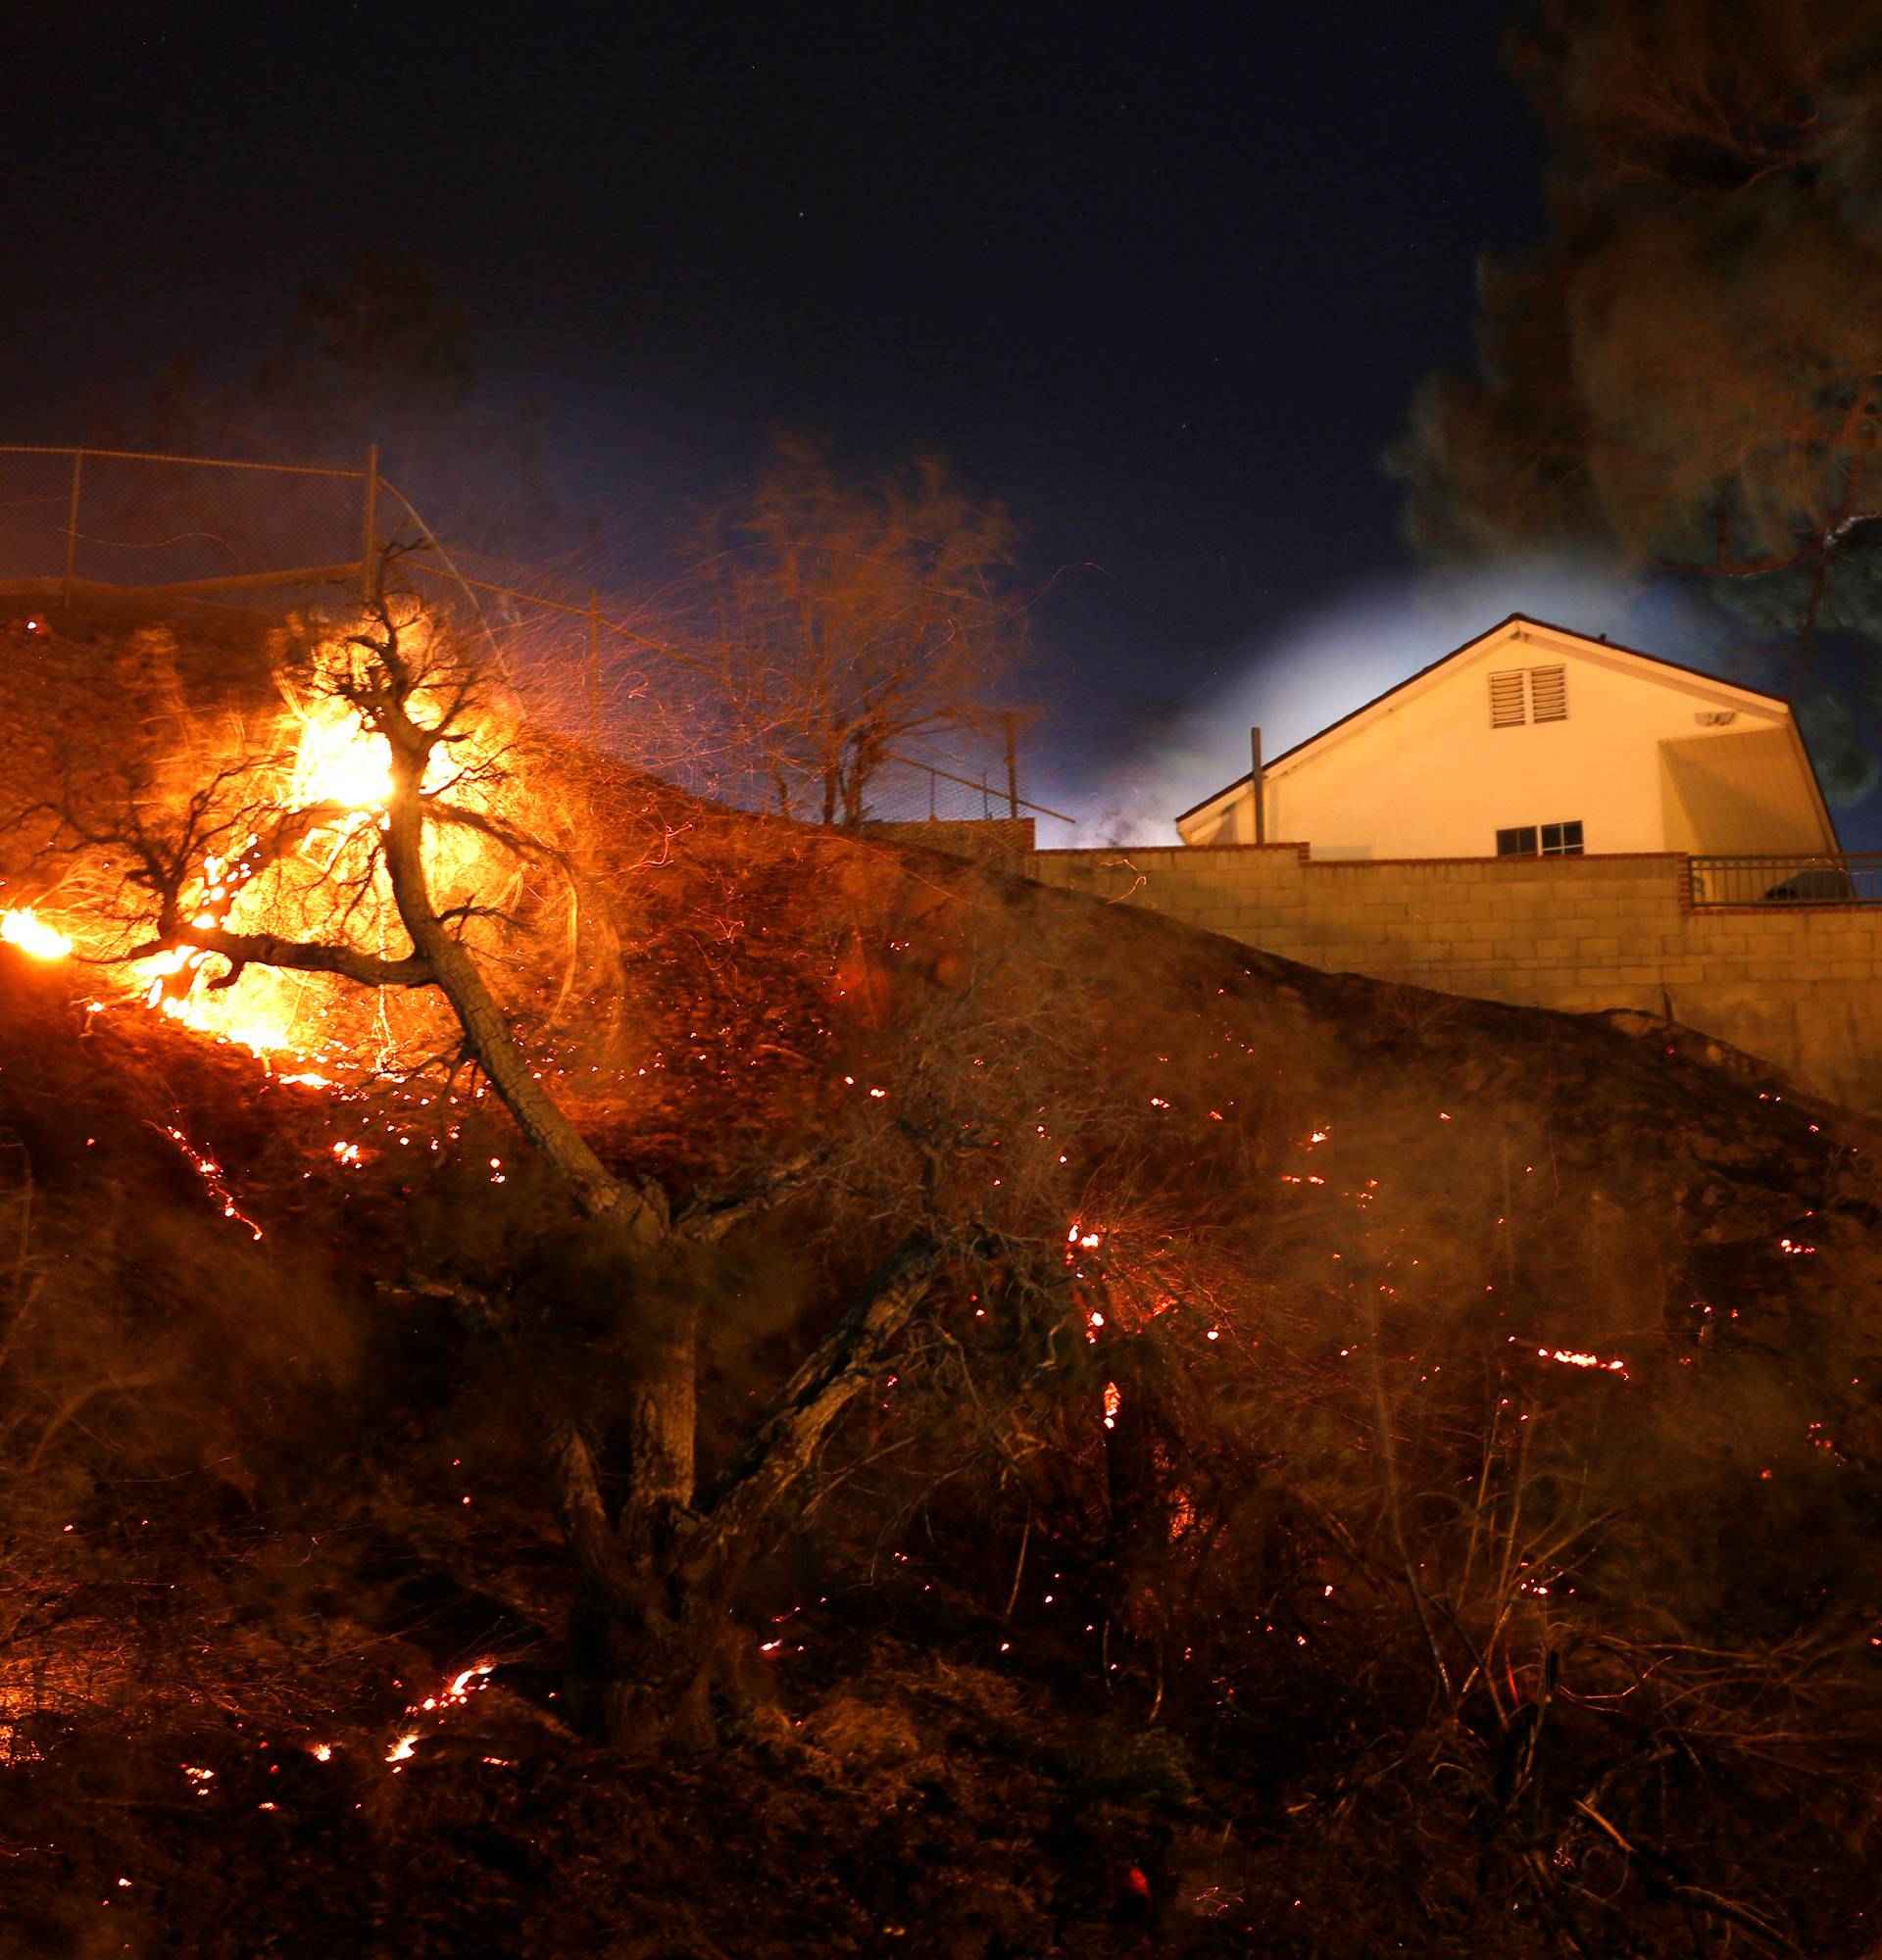 Embers continue burning near a home that was damaged during the Creek Fire in Sylmar, California